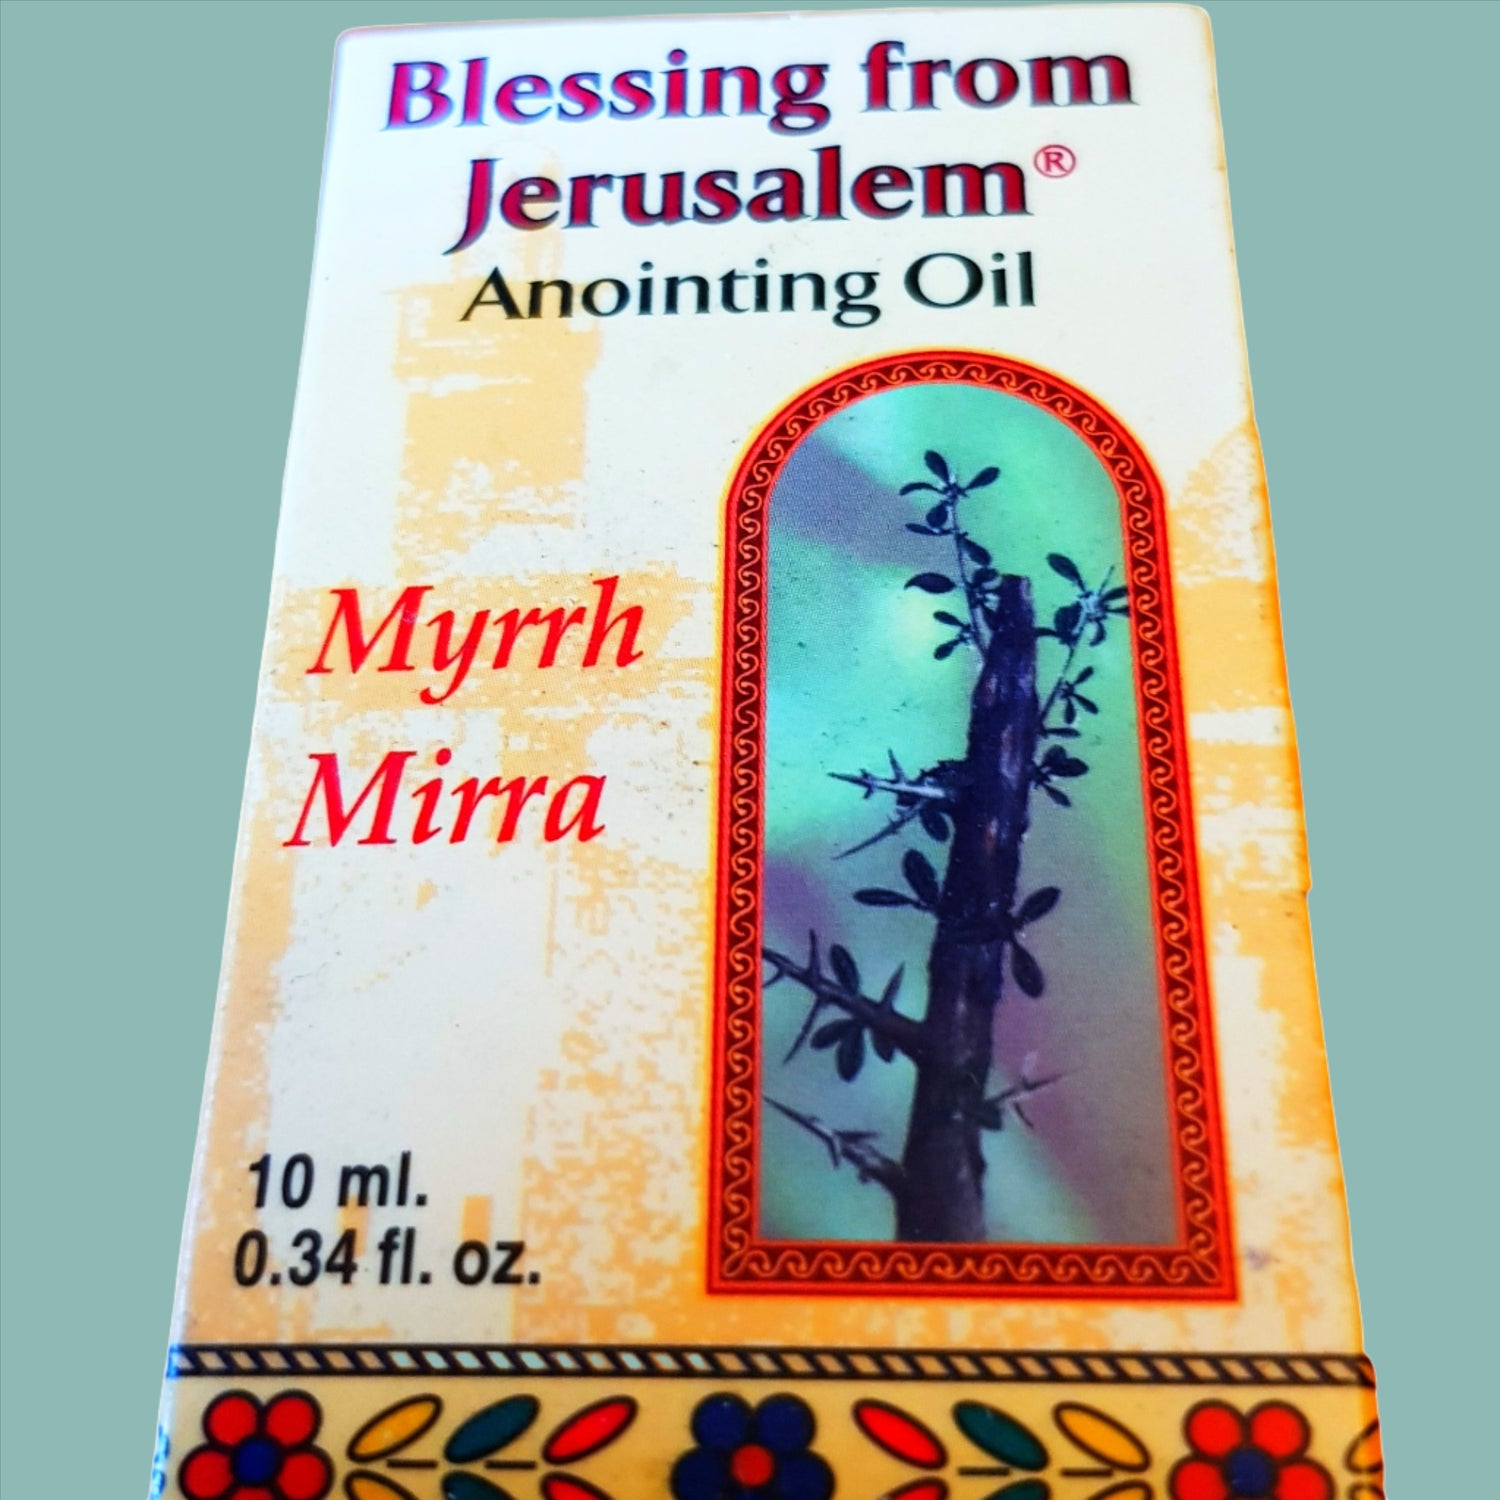 Bluenoemi Anointing Oil Frankincense & Myhrr Myhrr Anointing Oil Made in Israel, the Land of the Bible, 12 ml